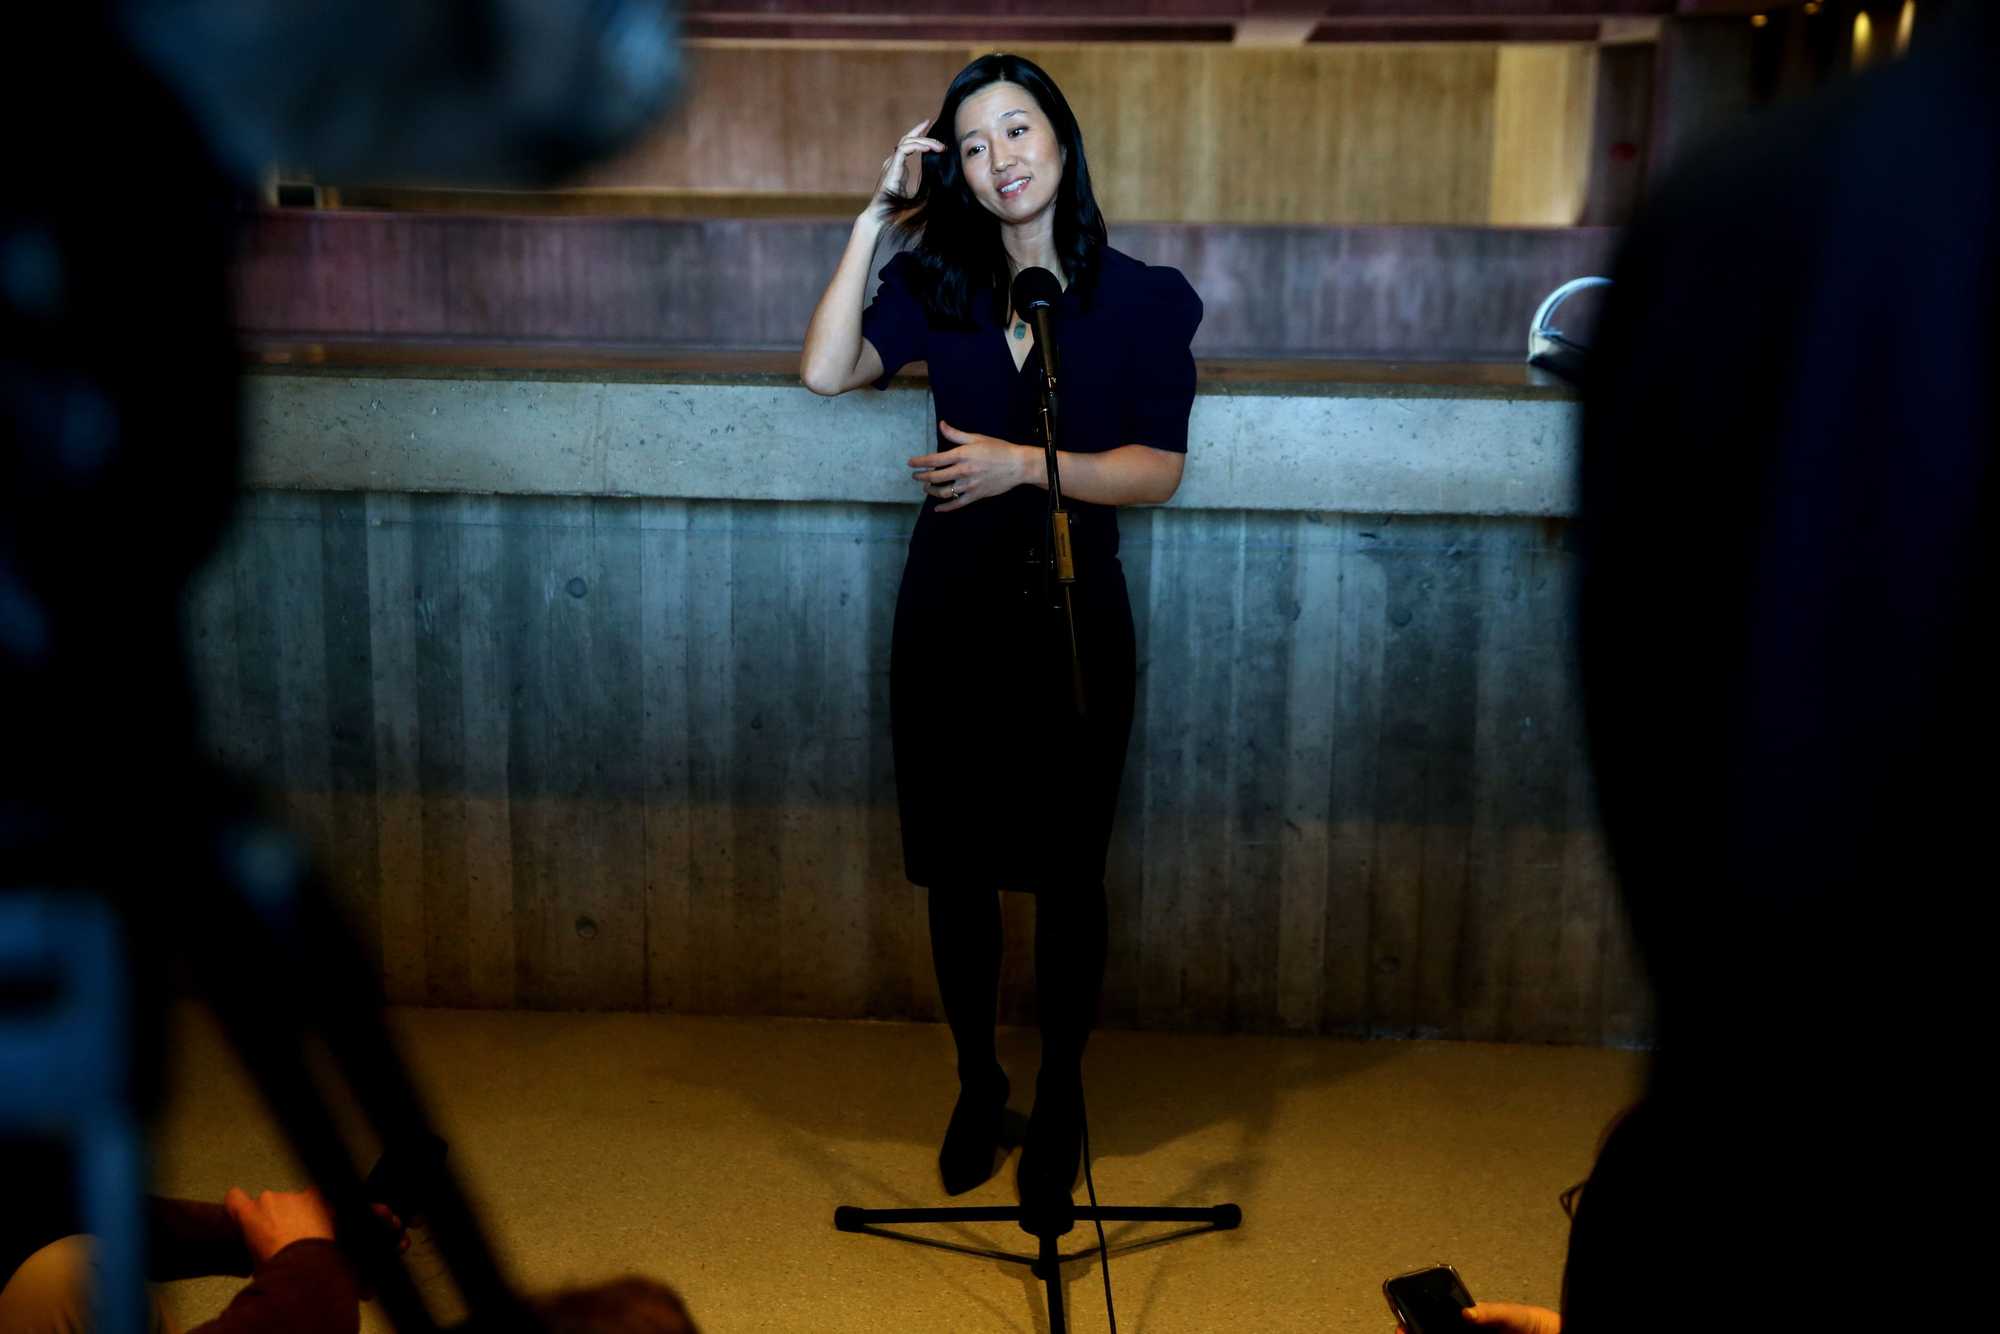 Boston Mayor Michelle Wu at City Hall on March 8, after the City Council approved her proposal to limit rent increases. The plan has since been submitted to the Legislature as a home-rule petition.